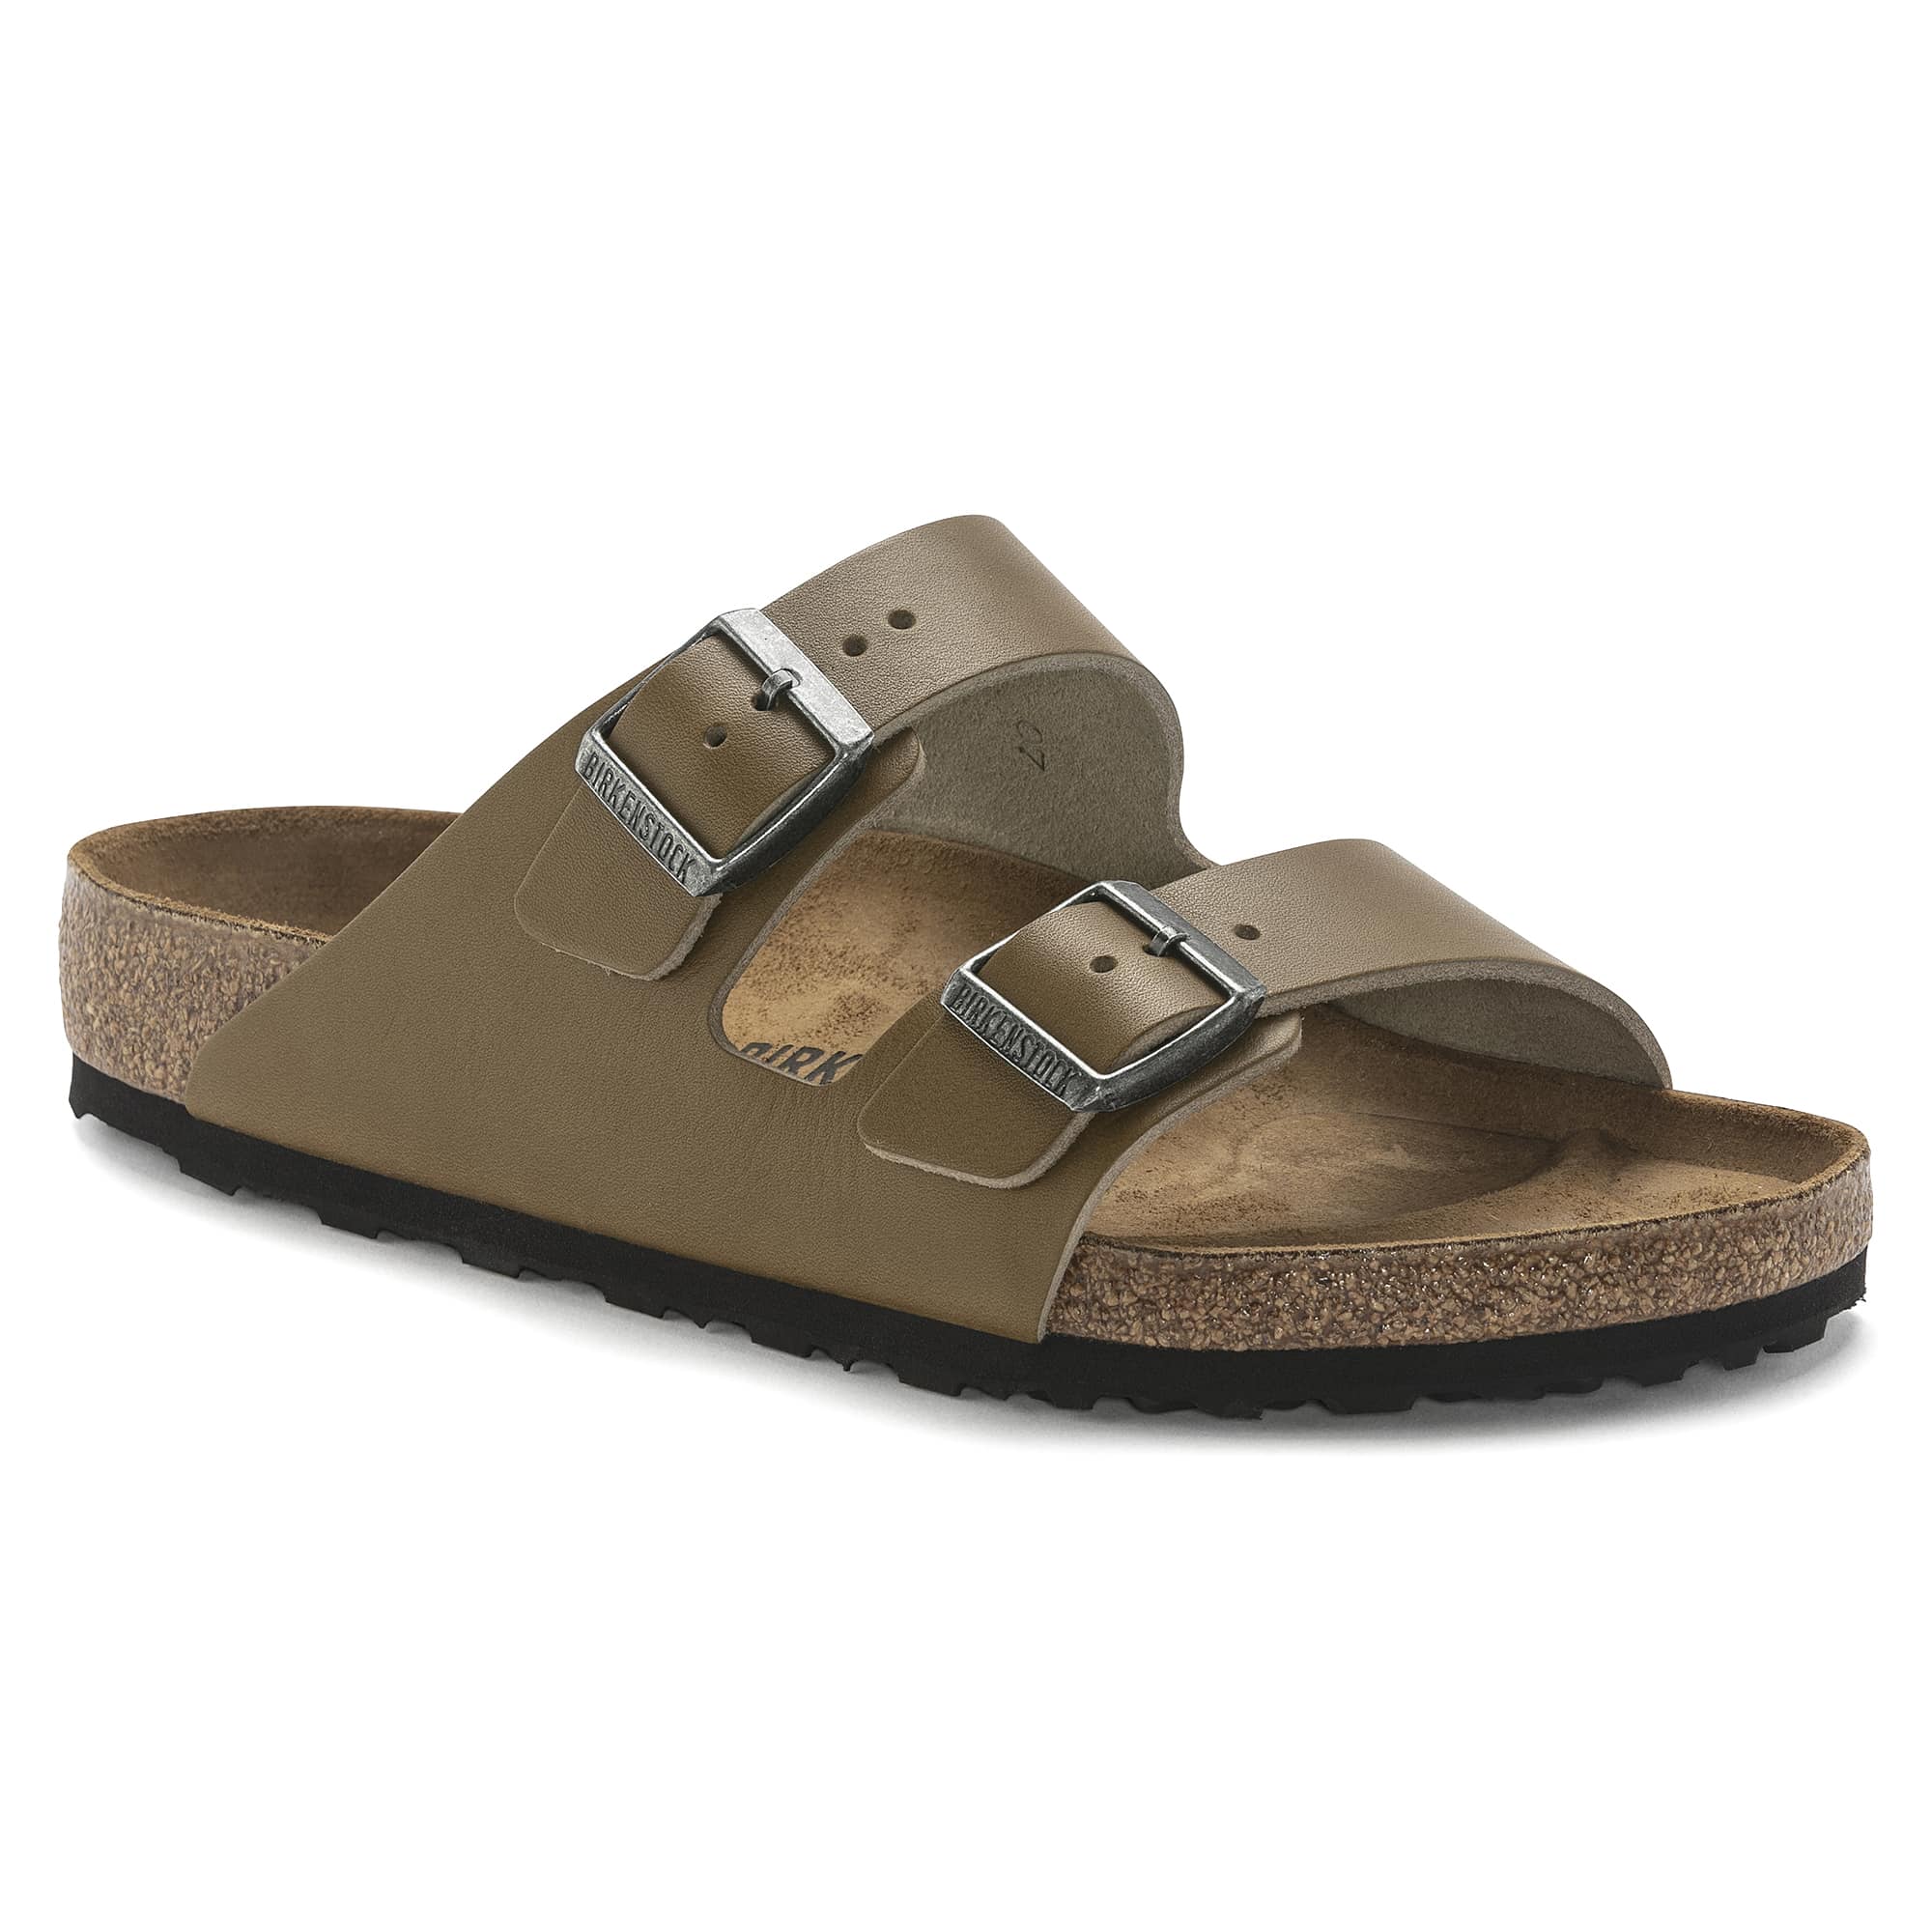 Mochi Men Brown Synthetic Sandals 7-UK (16-427-12-41) : Amazon.in: Fashion